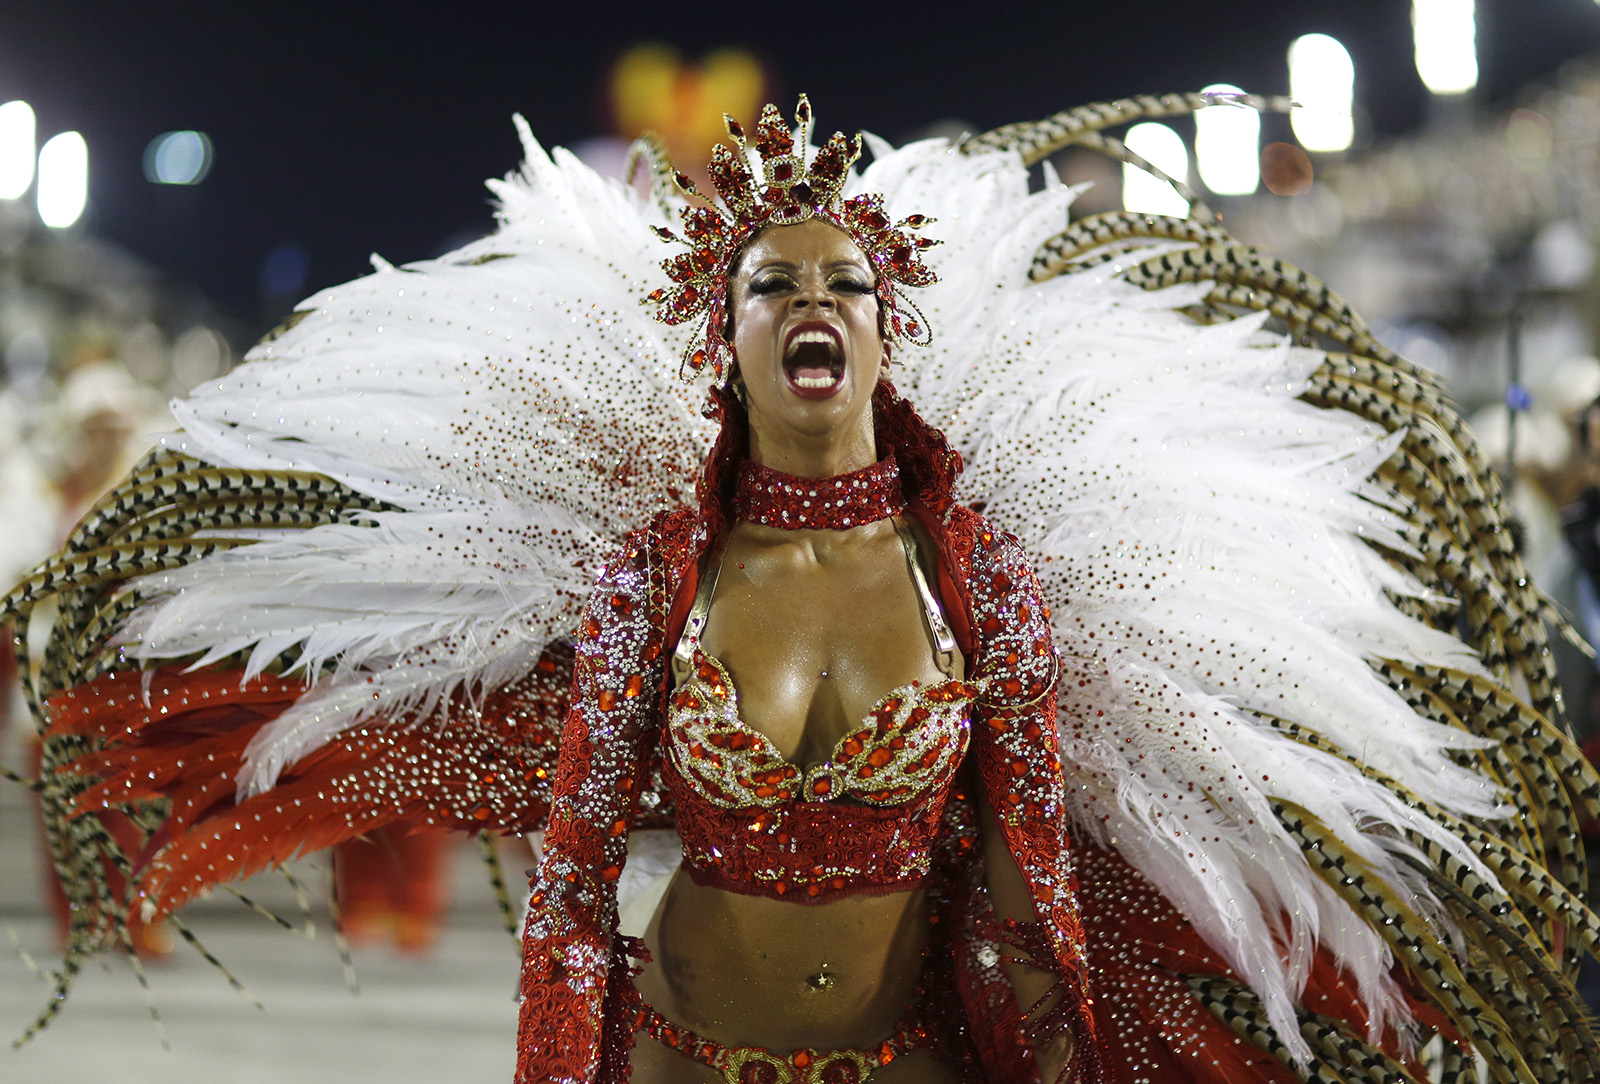 Rio Carnival 2015: Dancers and partygoers take over the 